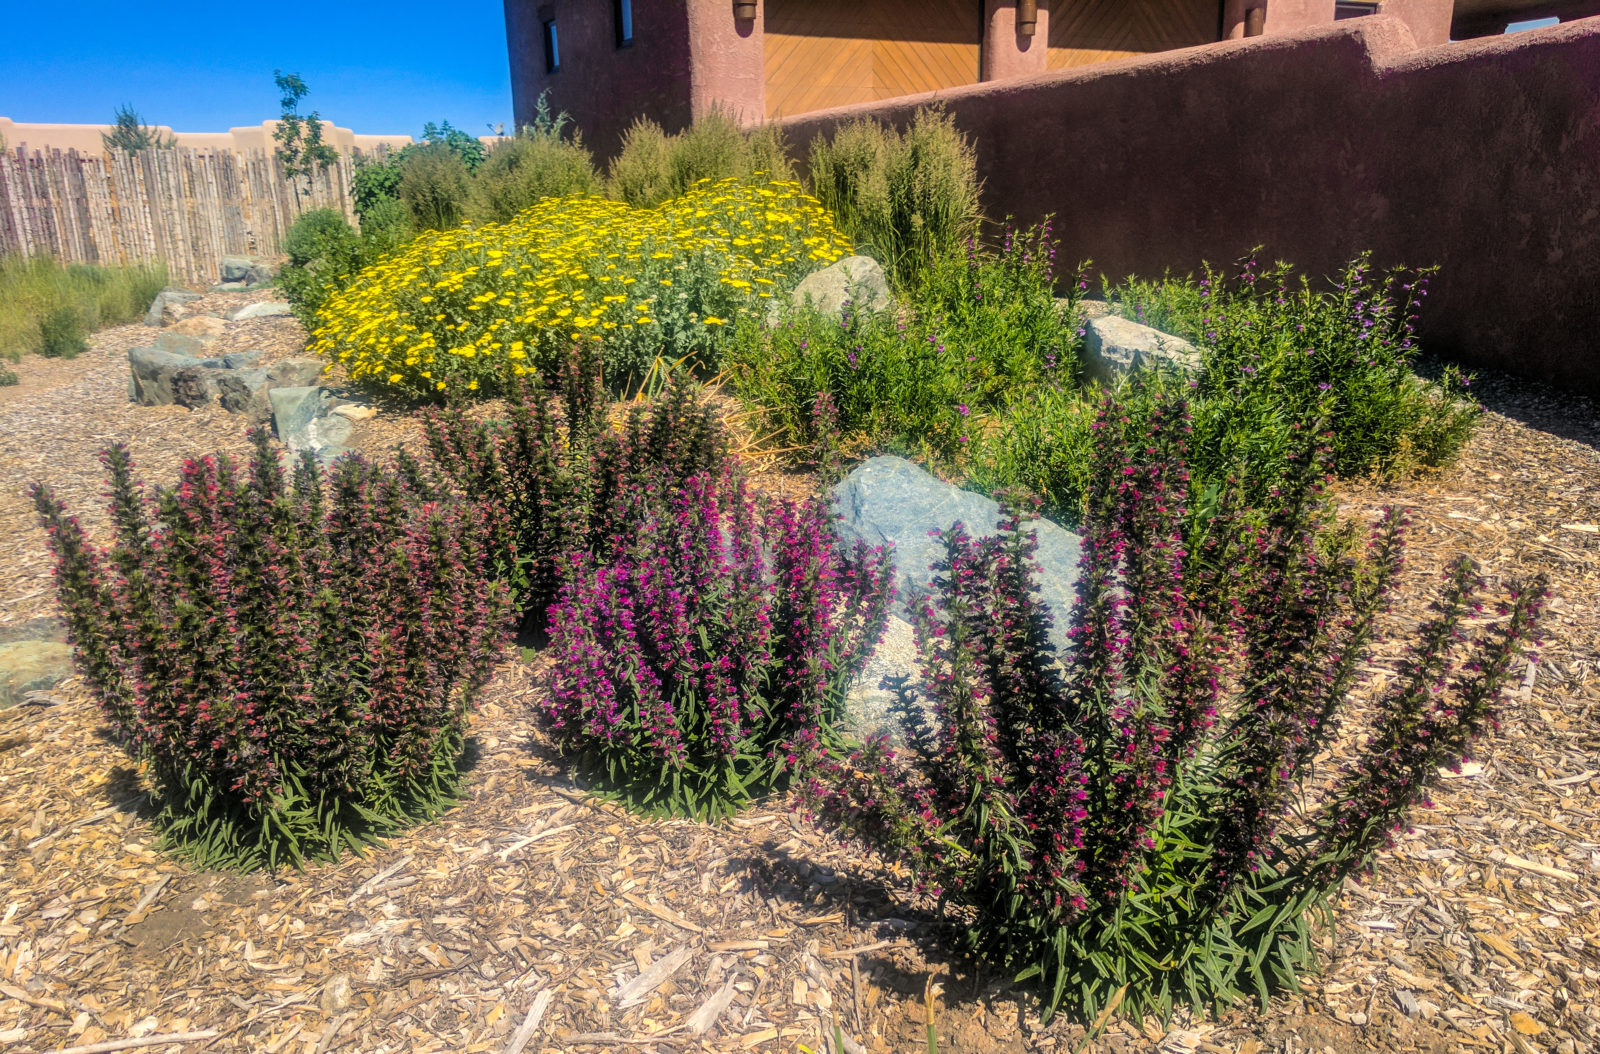 Native plants artfully arranged and blooming after this landscape design installation was completed